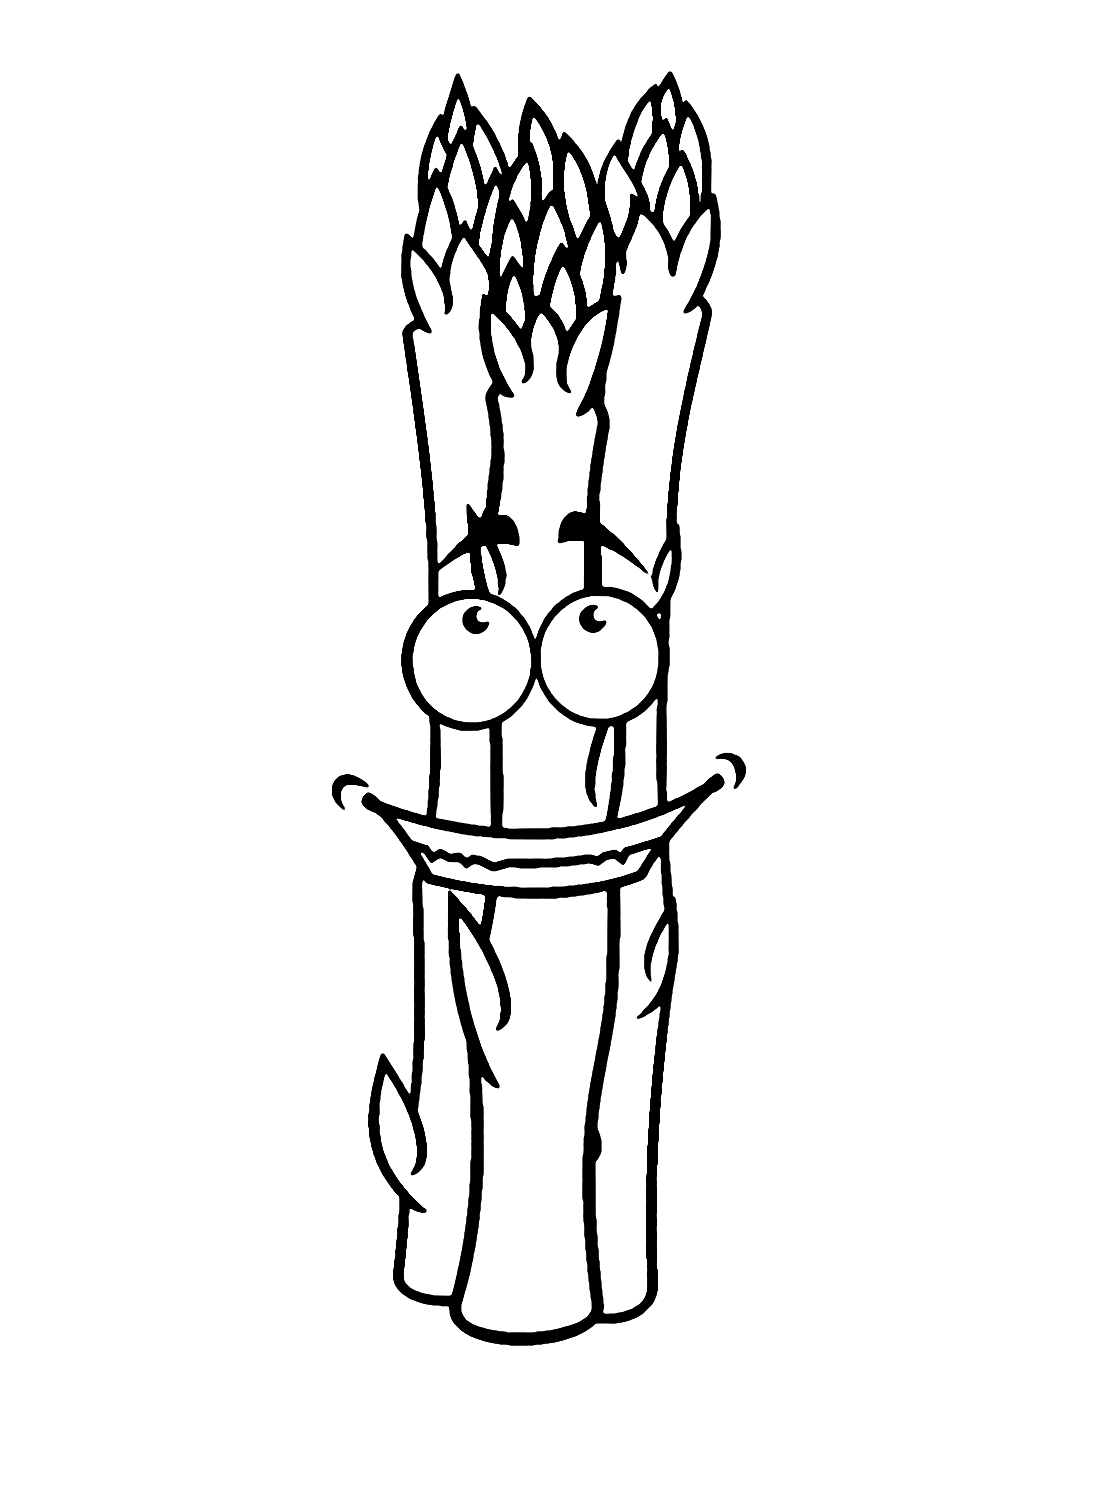 Asparagus coloring pages